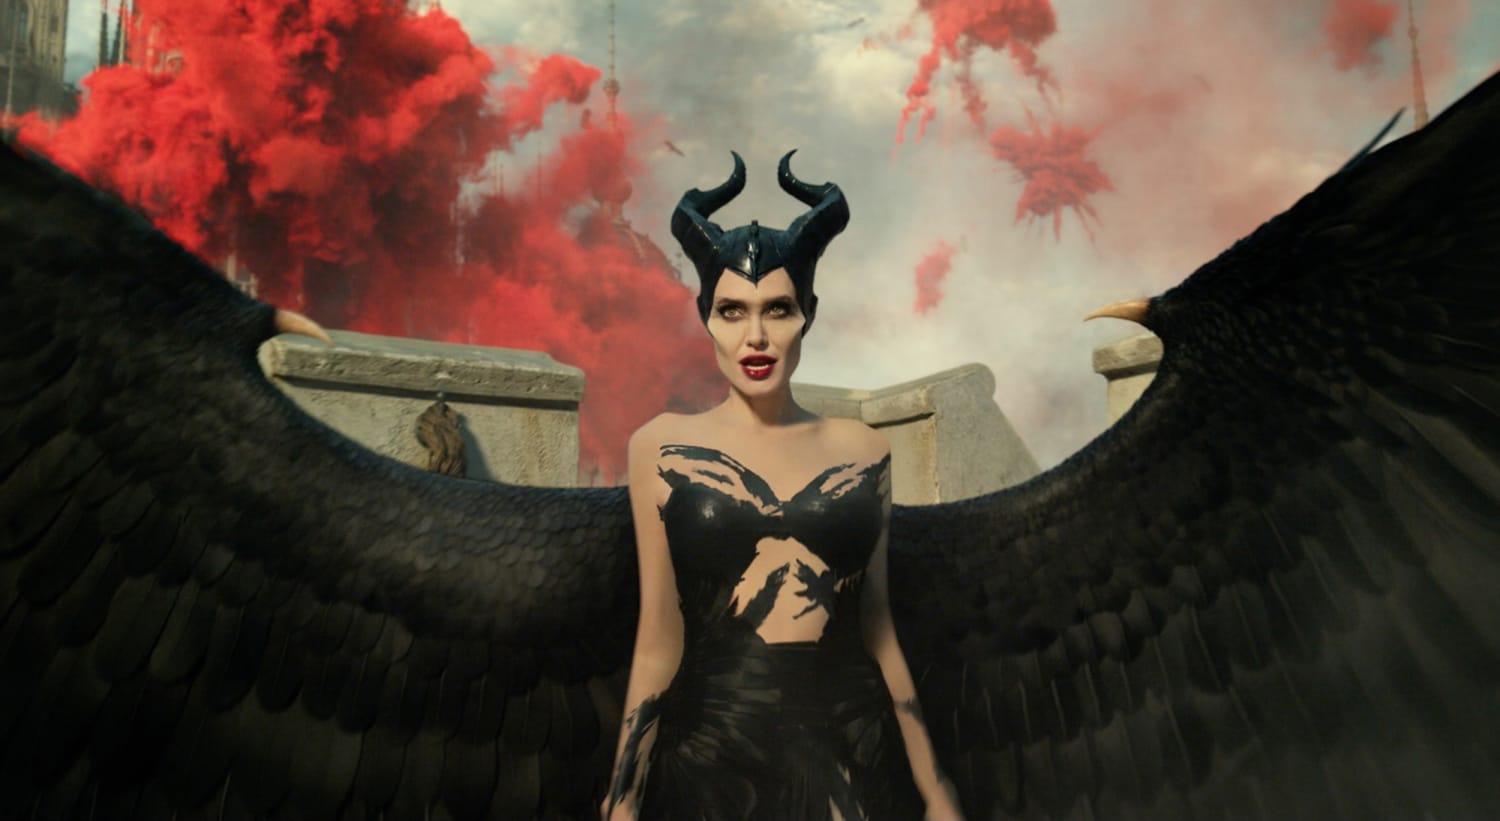 Disney's 'Maleficent' sequel features Angelina Jolie, Angelina Jolie's  cheekbones — and a mediocre plot